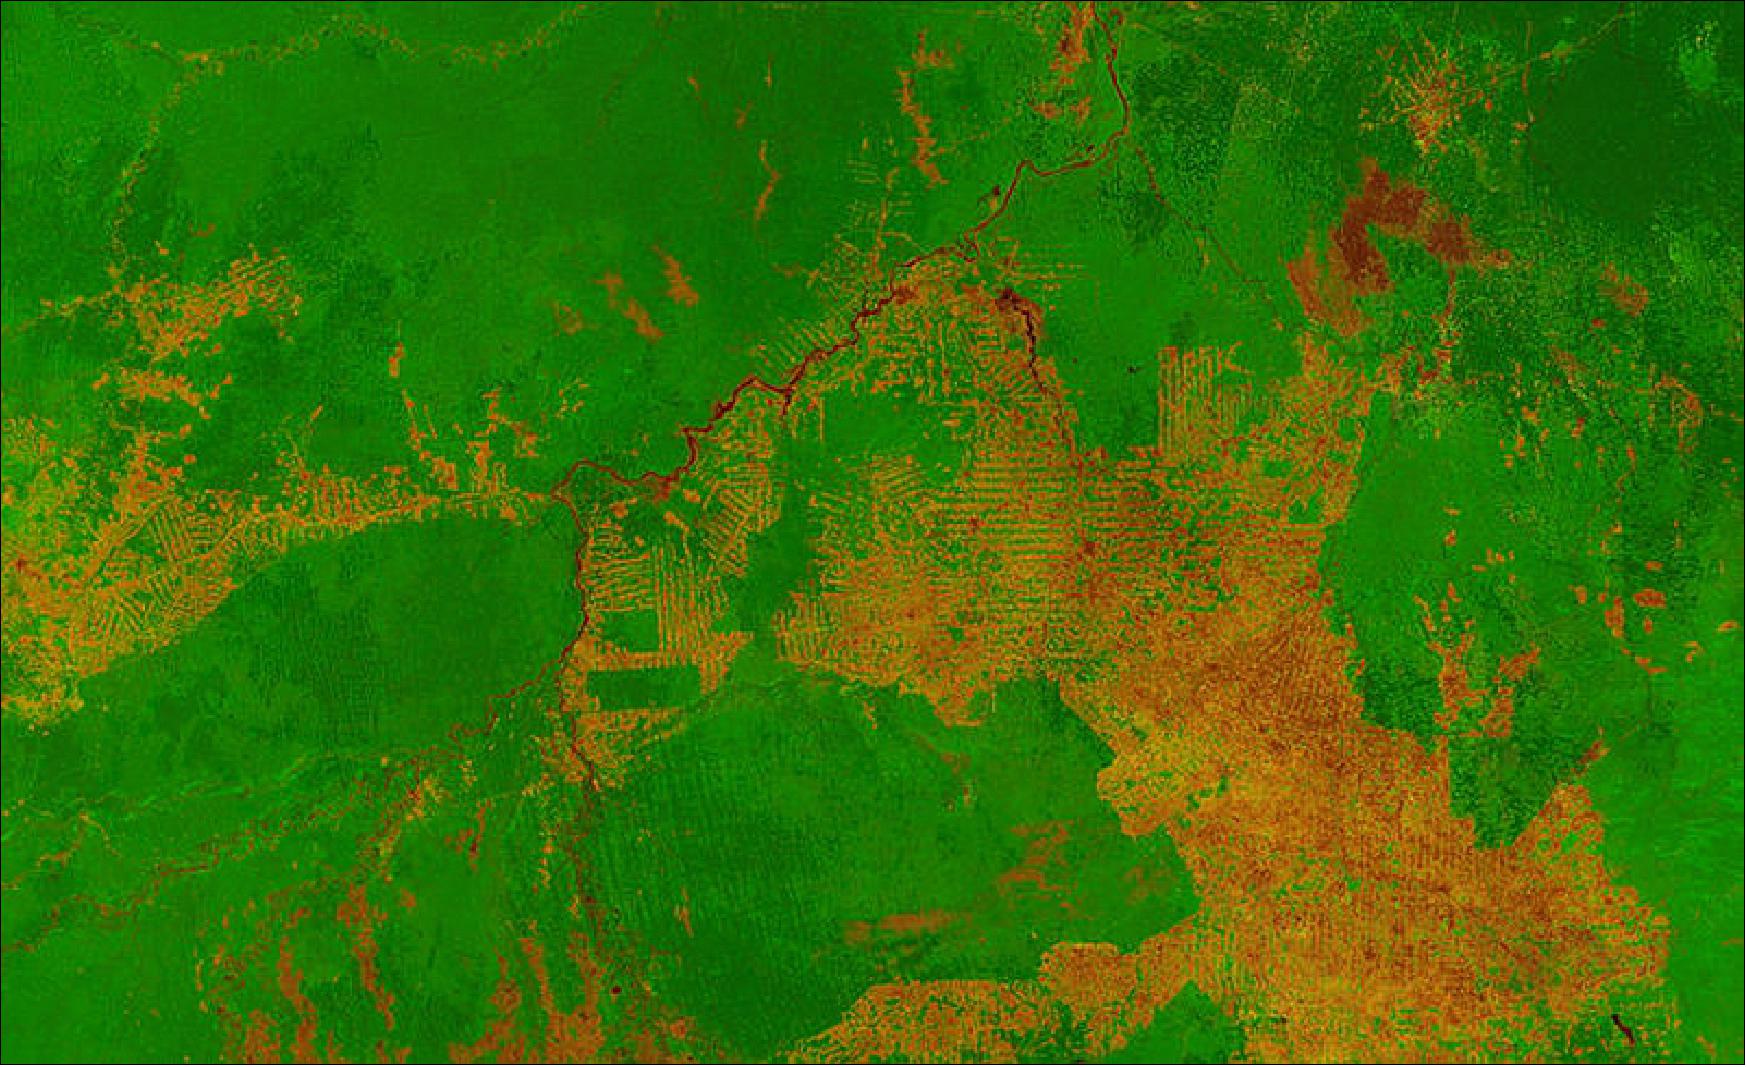 Figure 57: Deforestation in the state of Rondônia in western Brazil, as imaged by ESA's PROBA-V minisatellite (image credit: ESA, VITO)